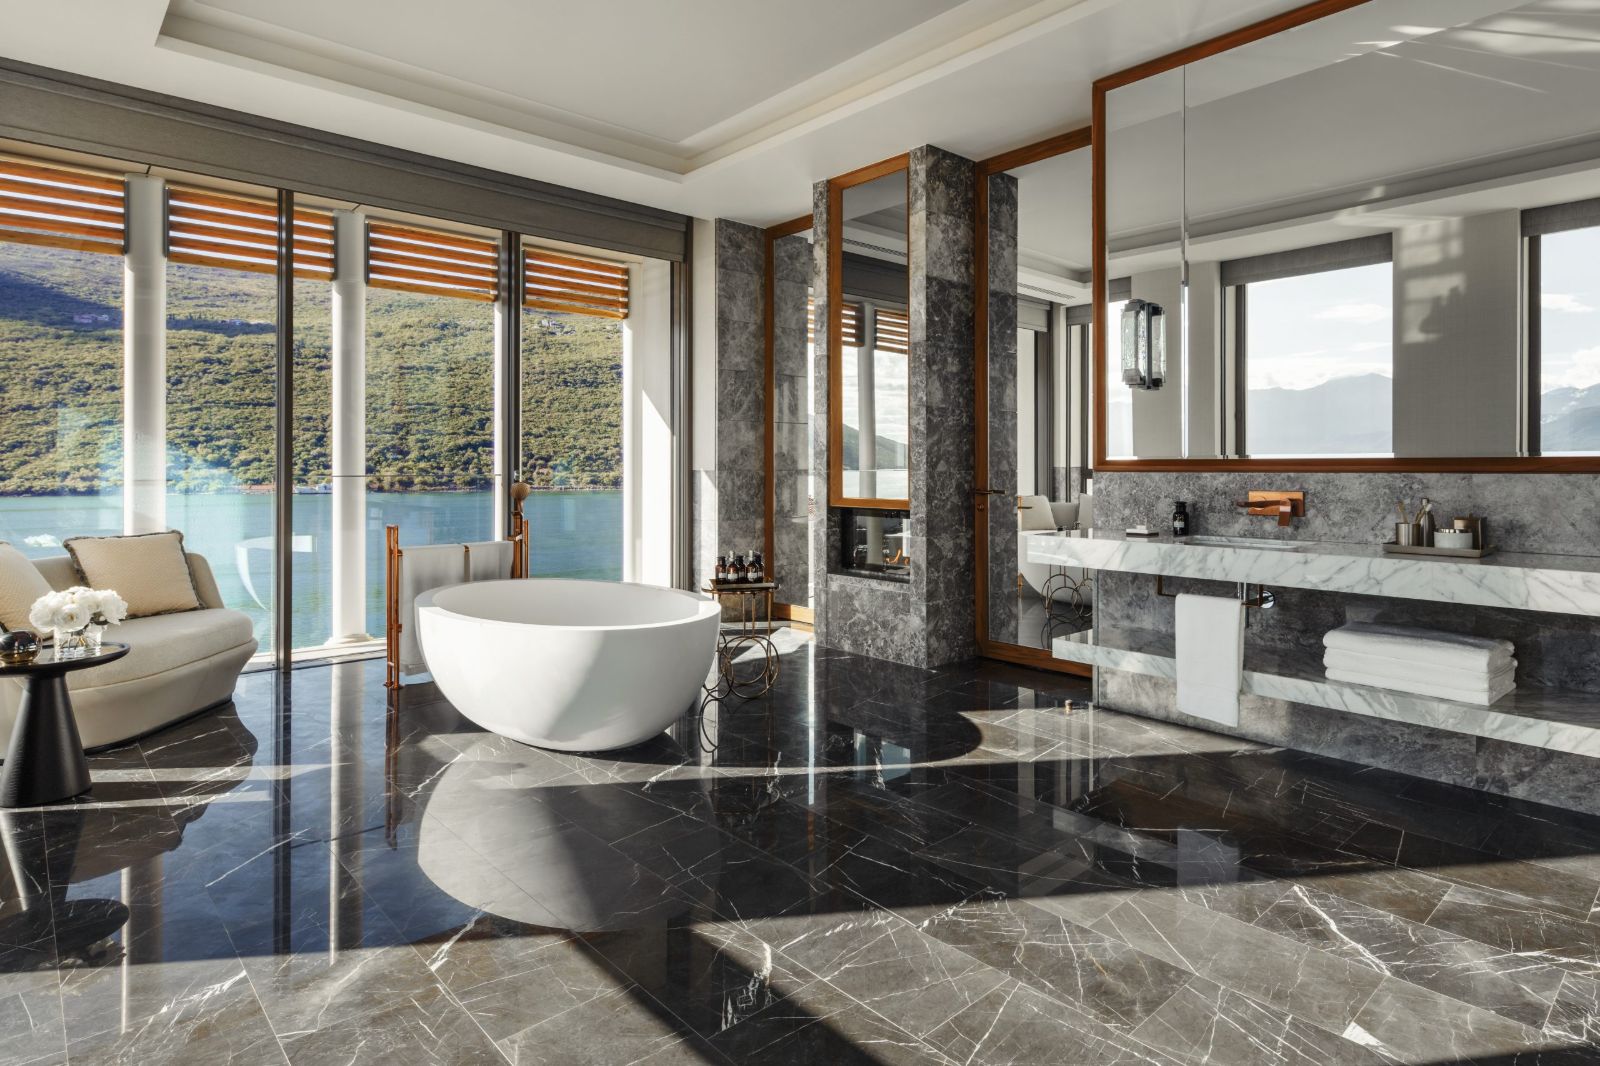 Bathroom of a suite at the One&Only Portonovi in Montenegro